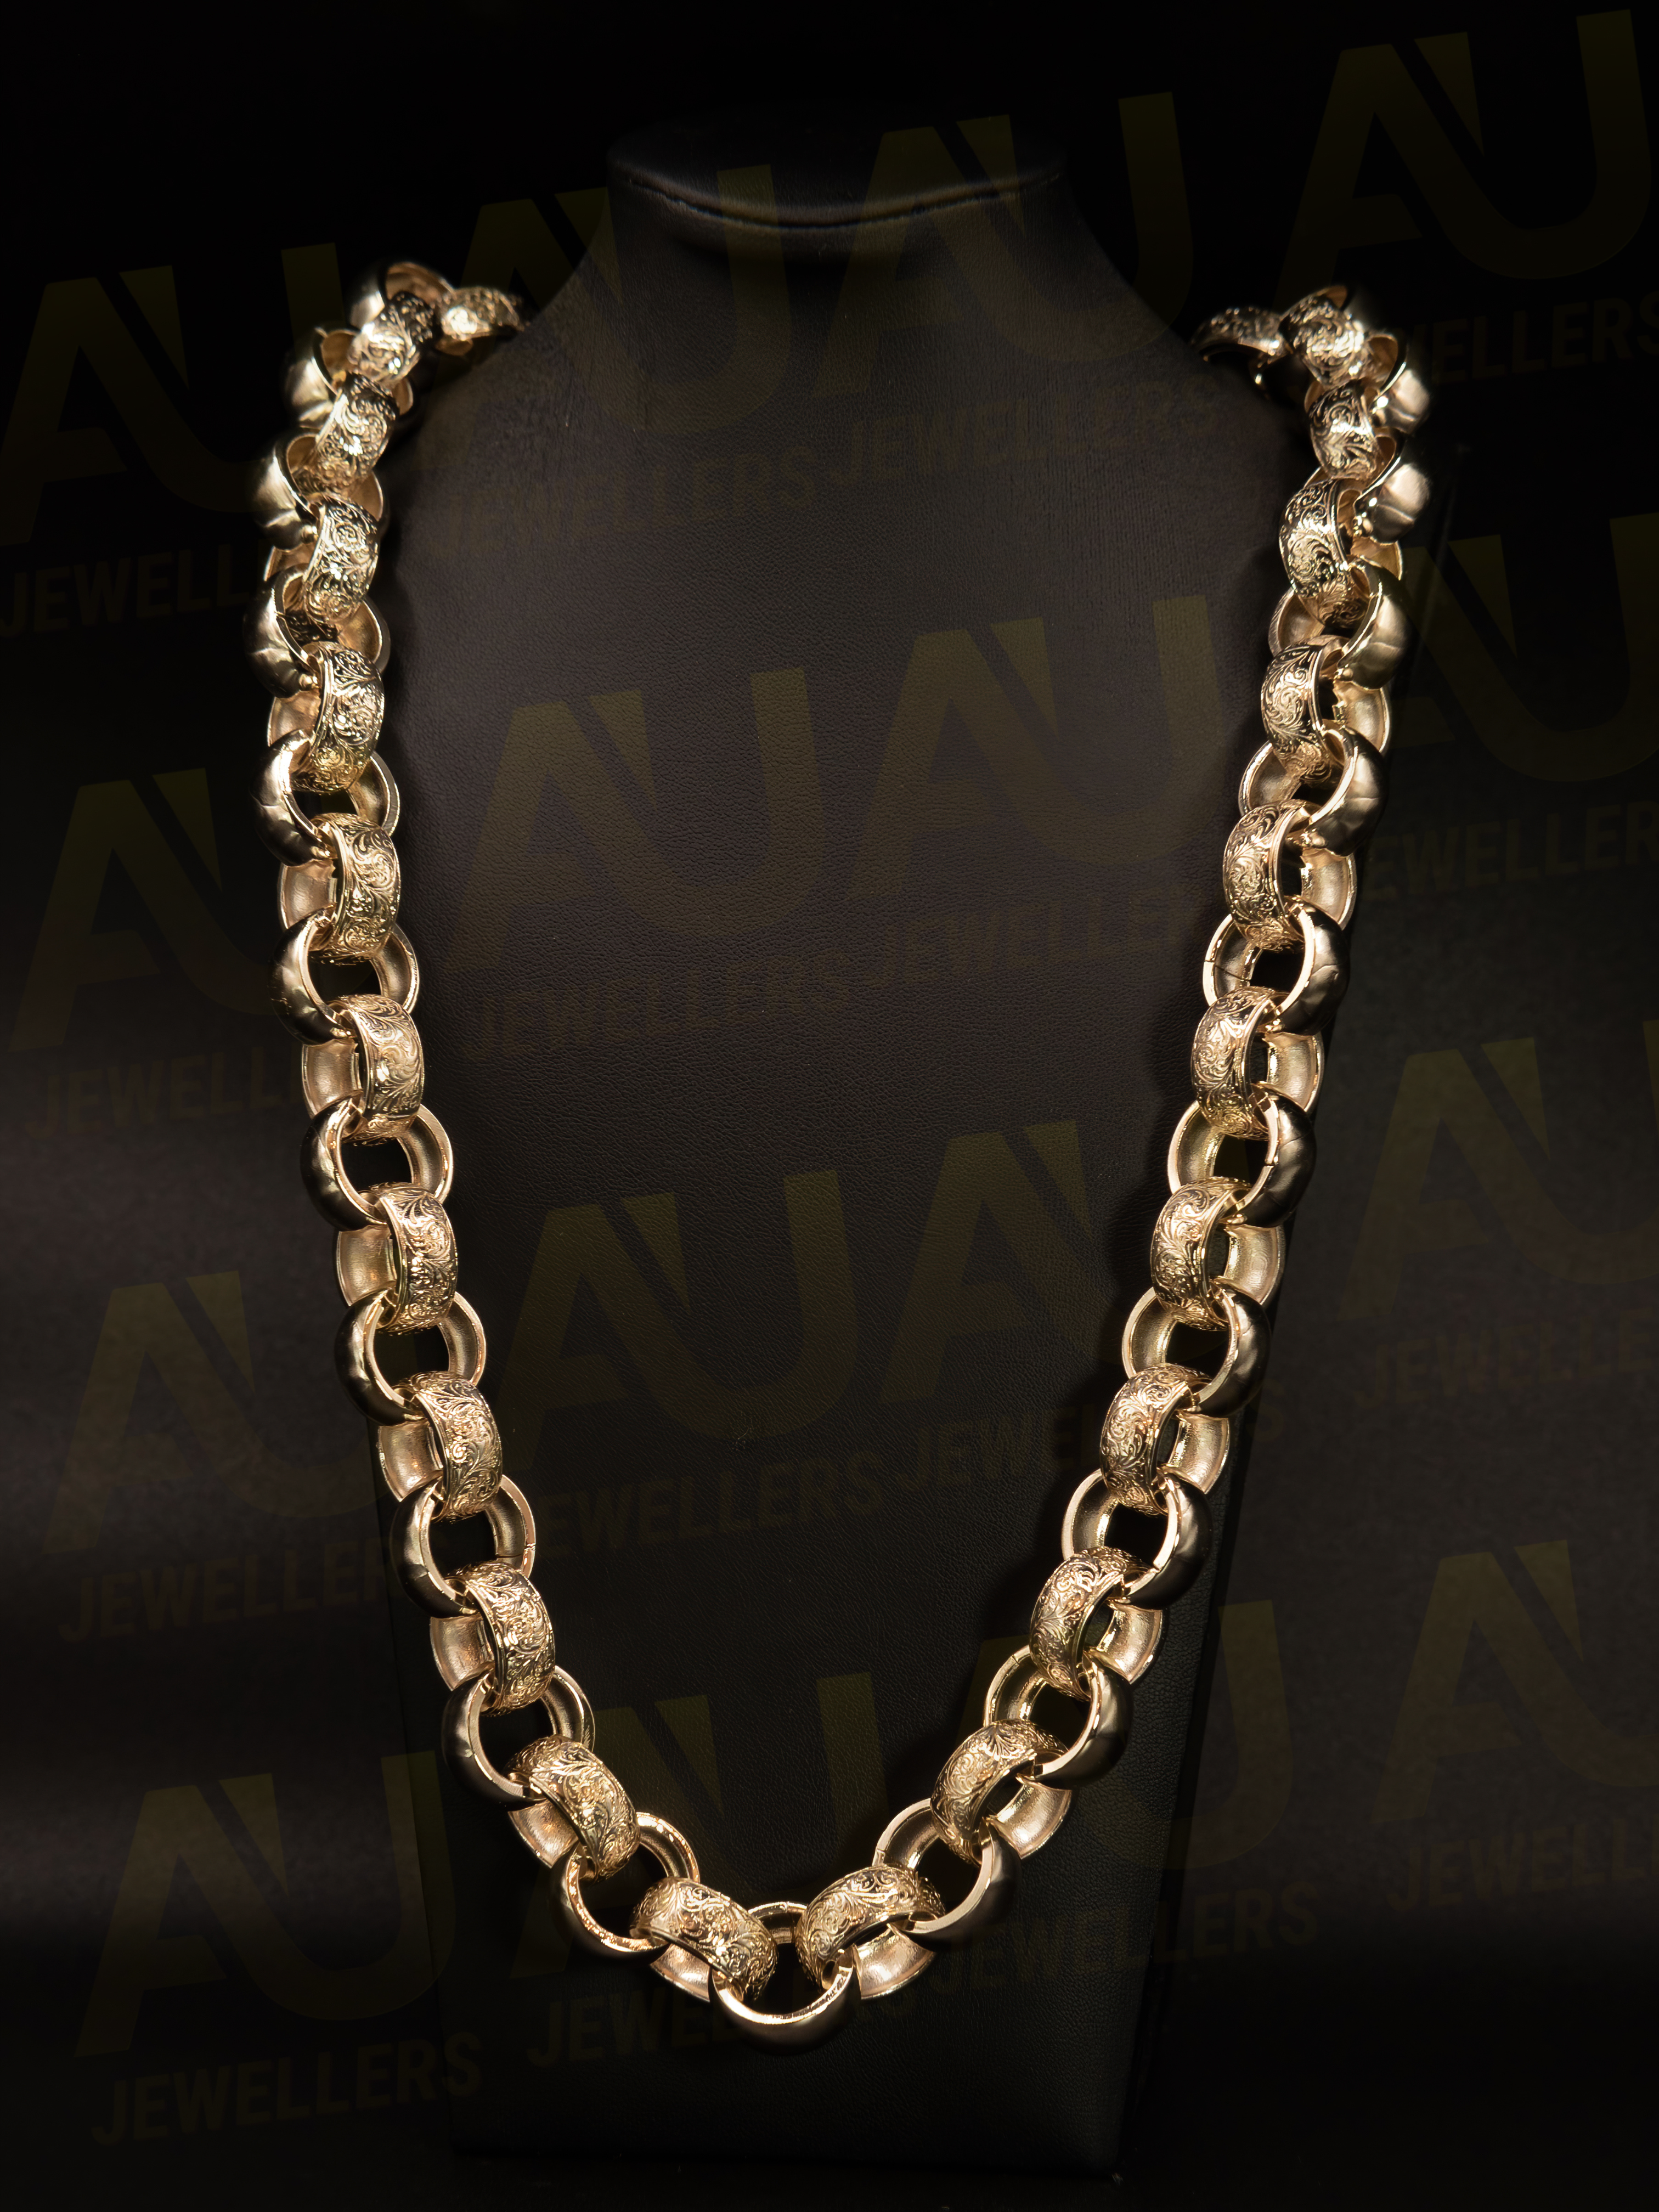 9ct Gold Filled XL Patterned Belcher Chain 21mm